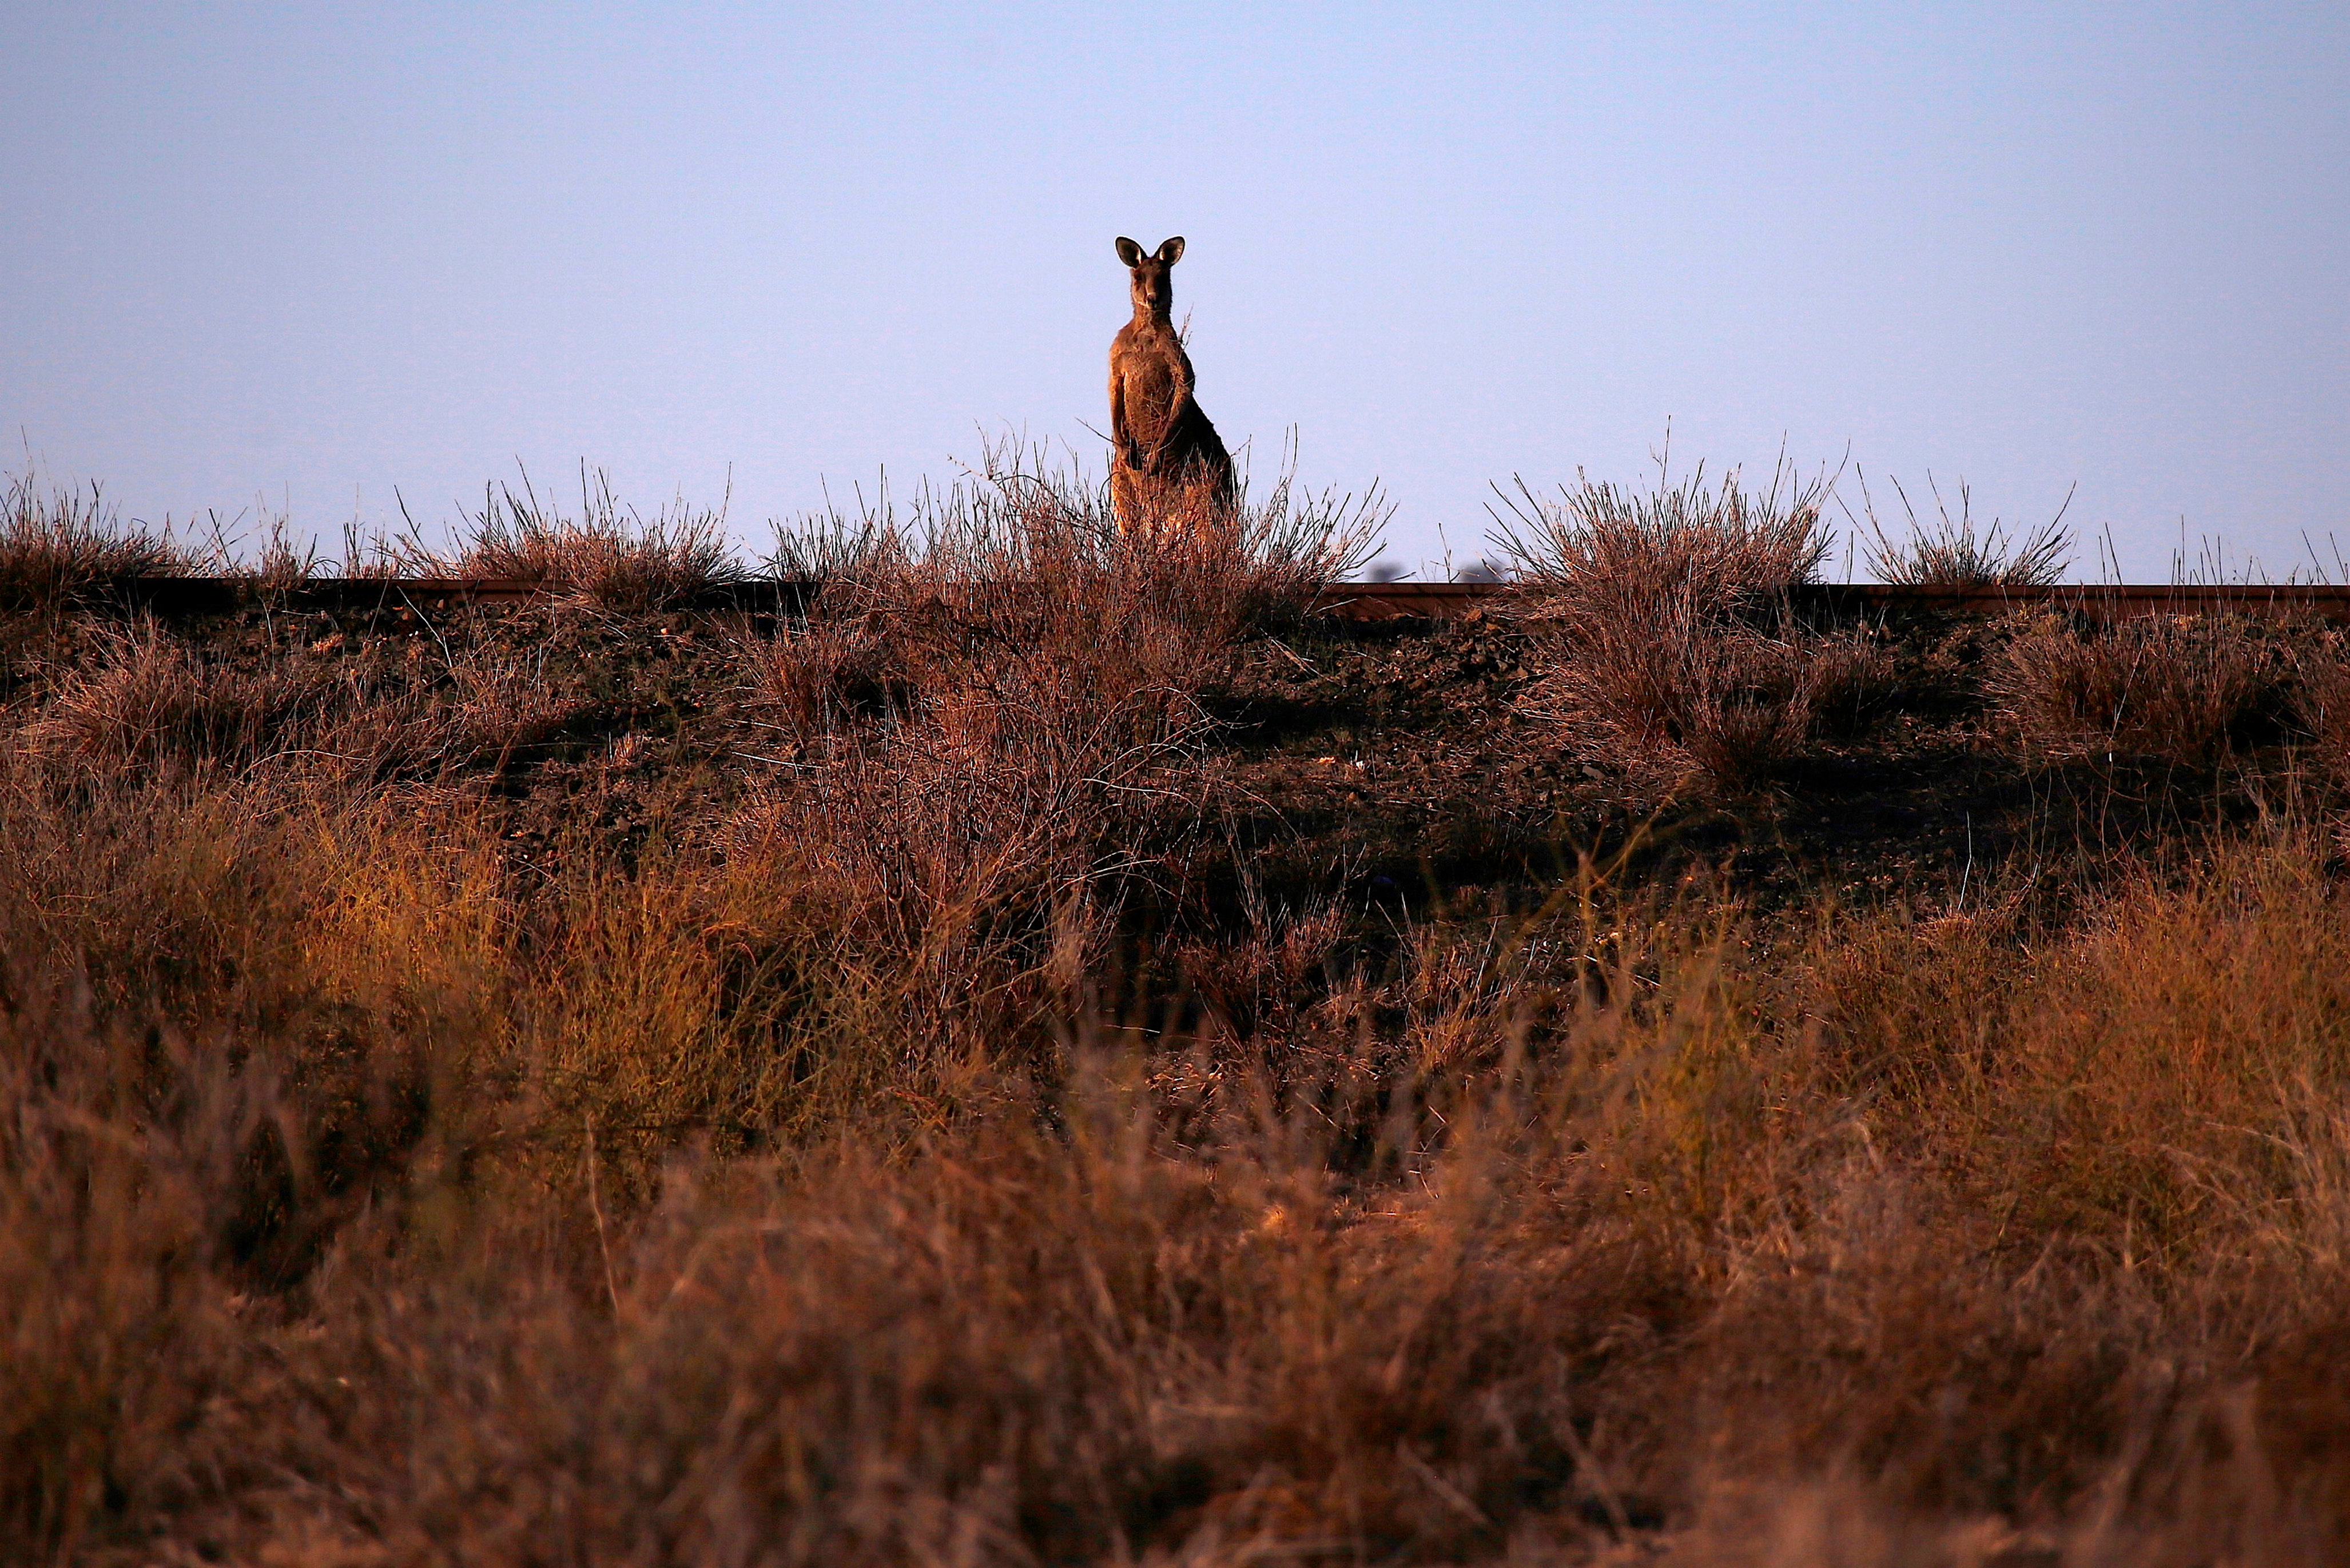 A kangaroo stands on a disused railway line located on the outskirts of Bourke in outback Australia